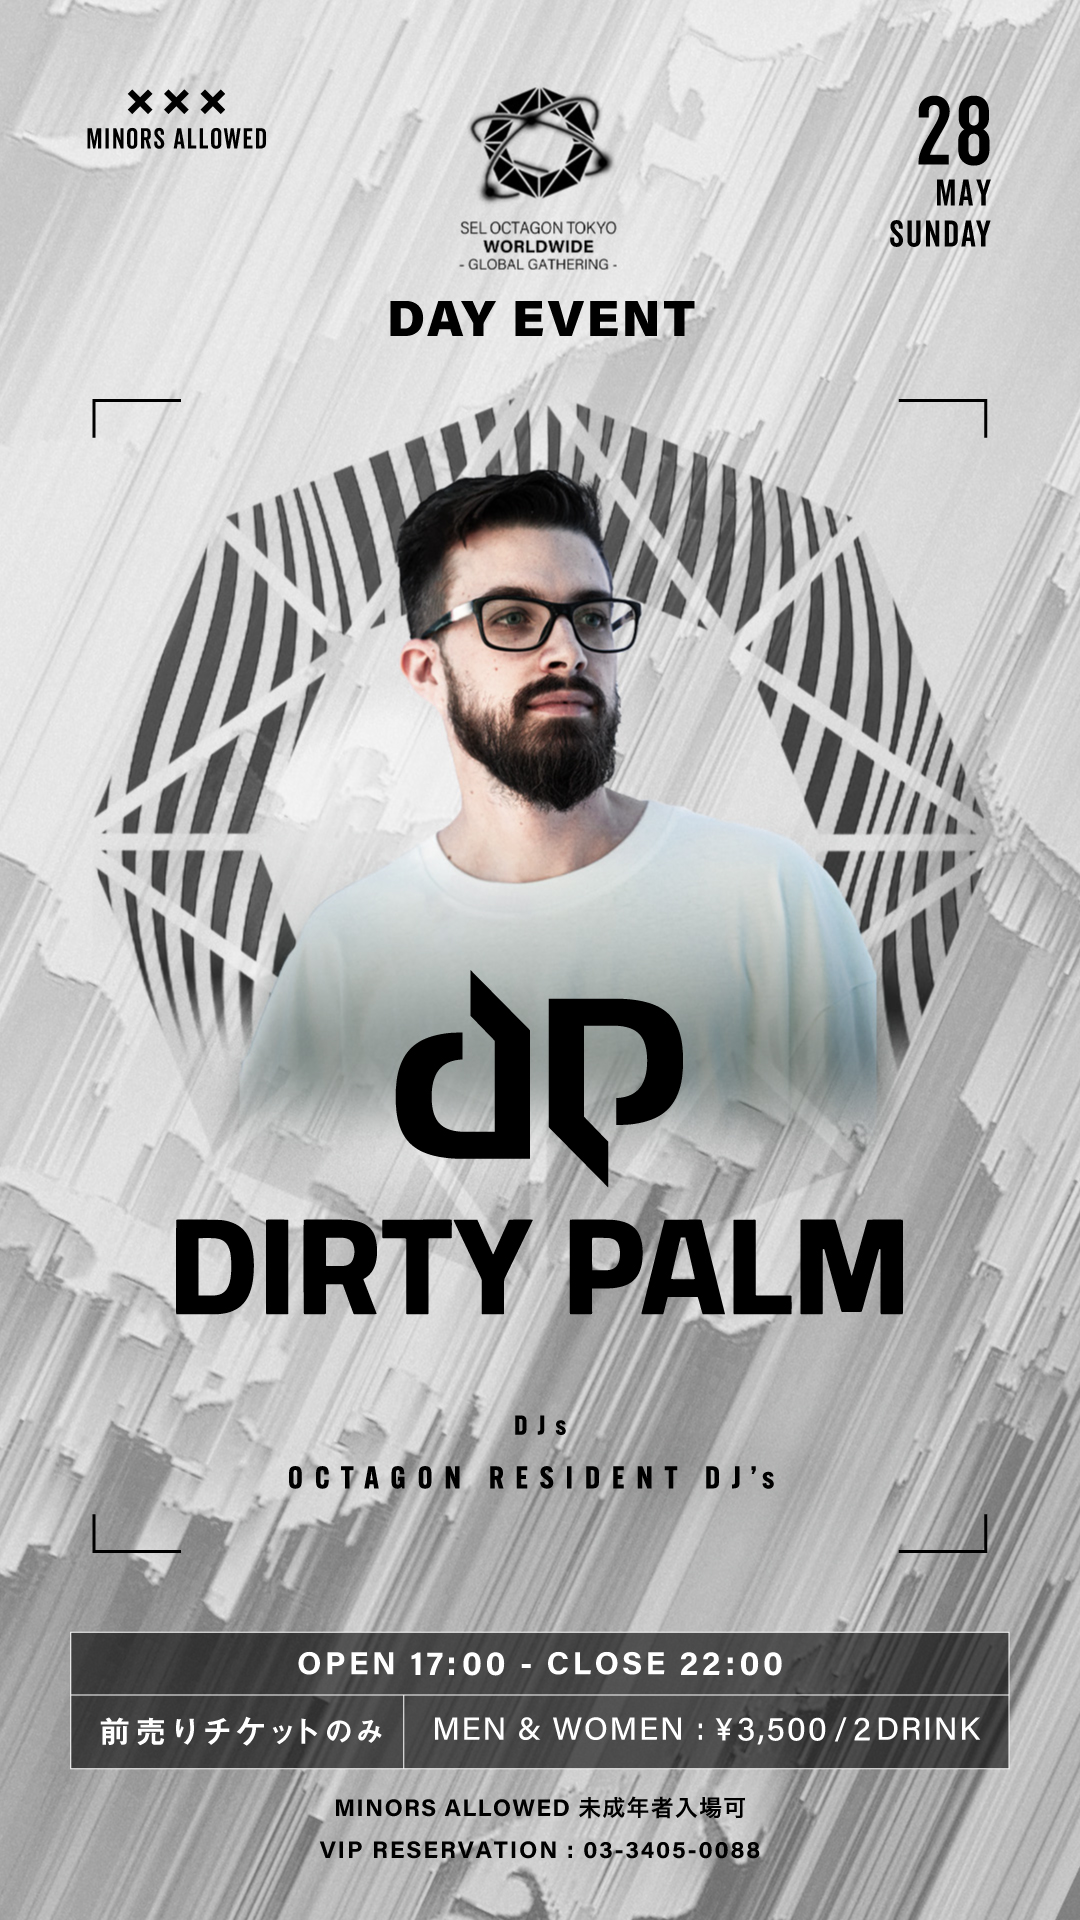 【DAY TIME -20歳未満入場可-】 "DIRTY PALM"　at SEL OCTAGON TOKYO